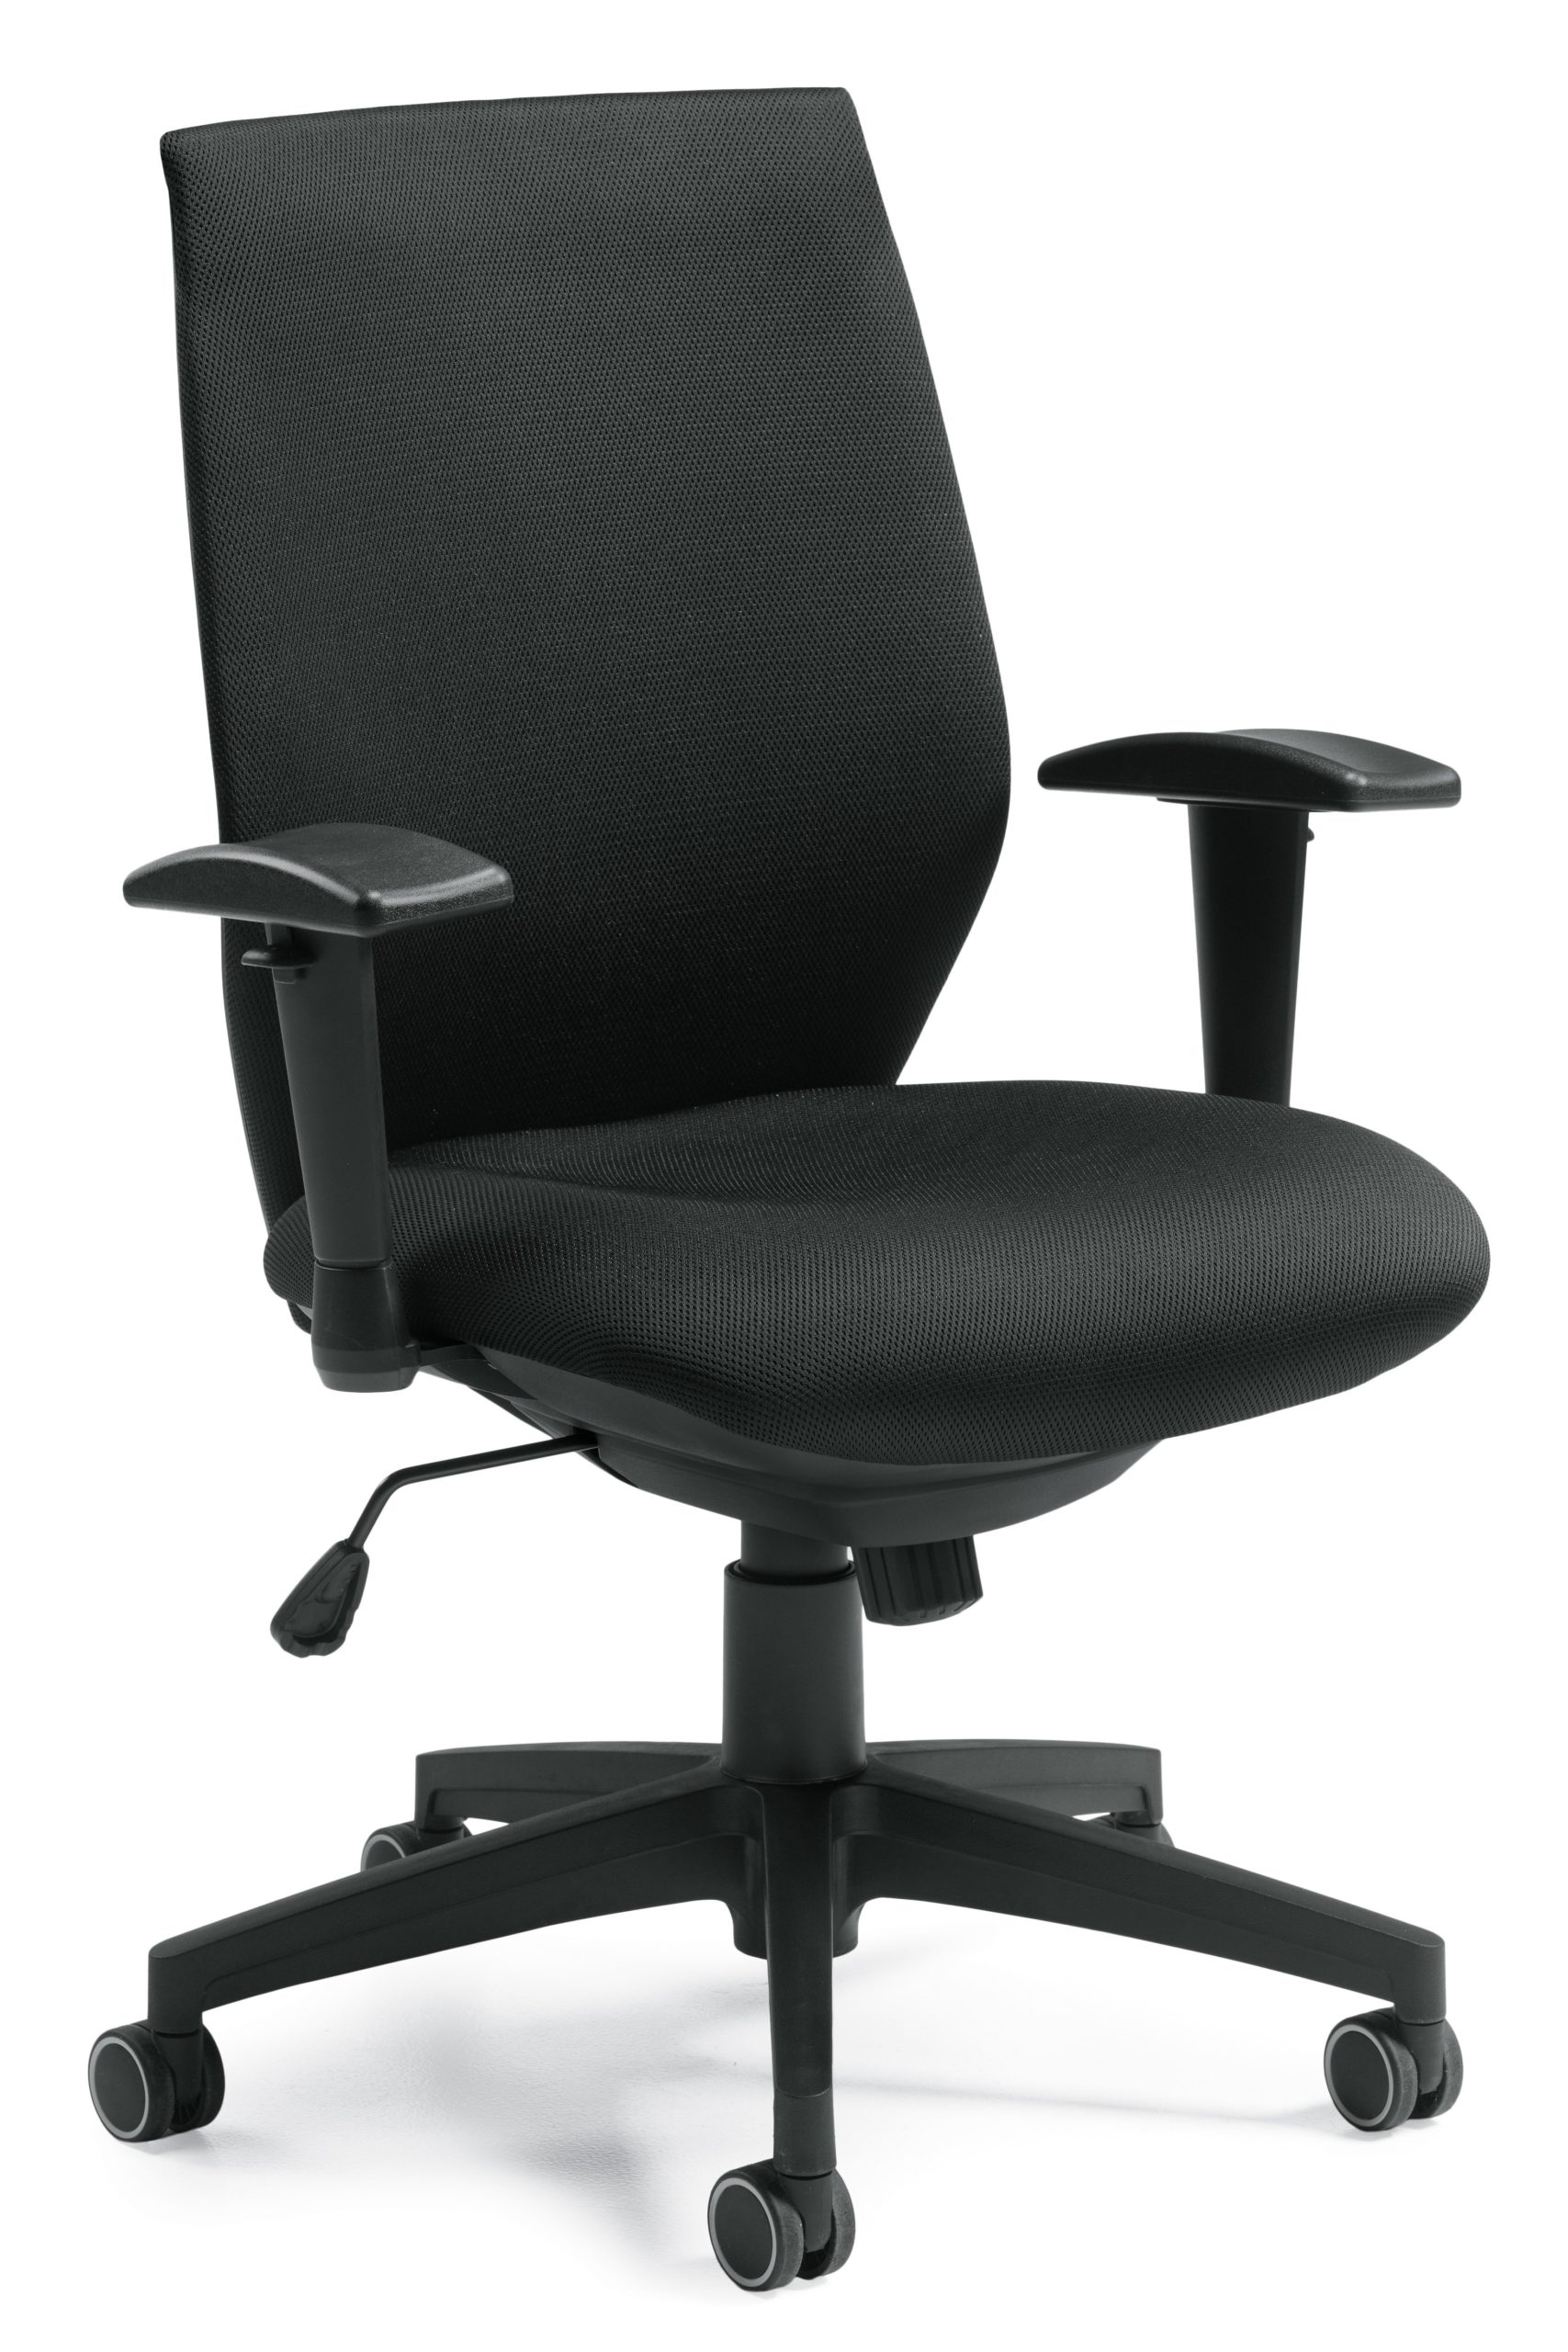 Entry level high back task chair with black fabric seat and back, height adjustable arms, tension control, and 5-star resin base.